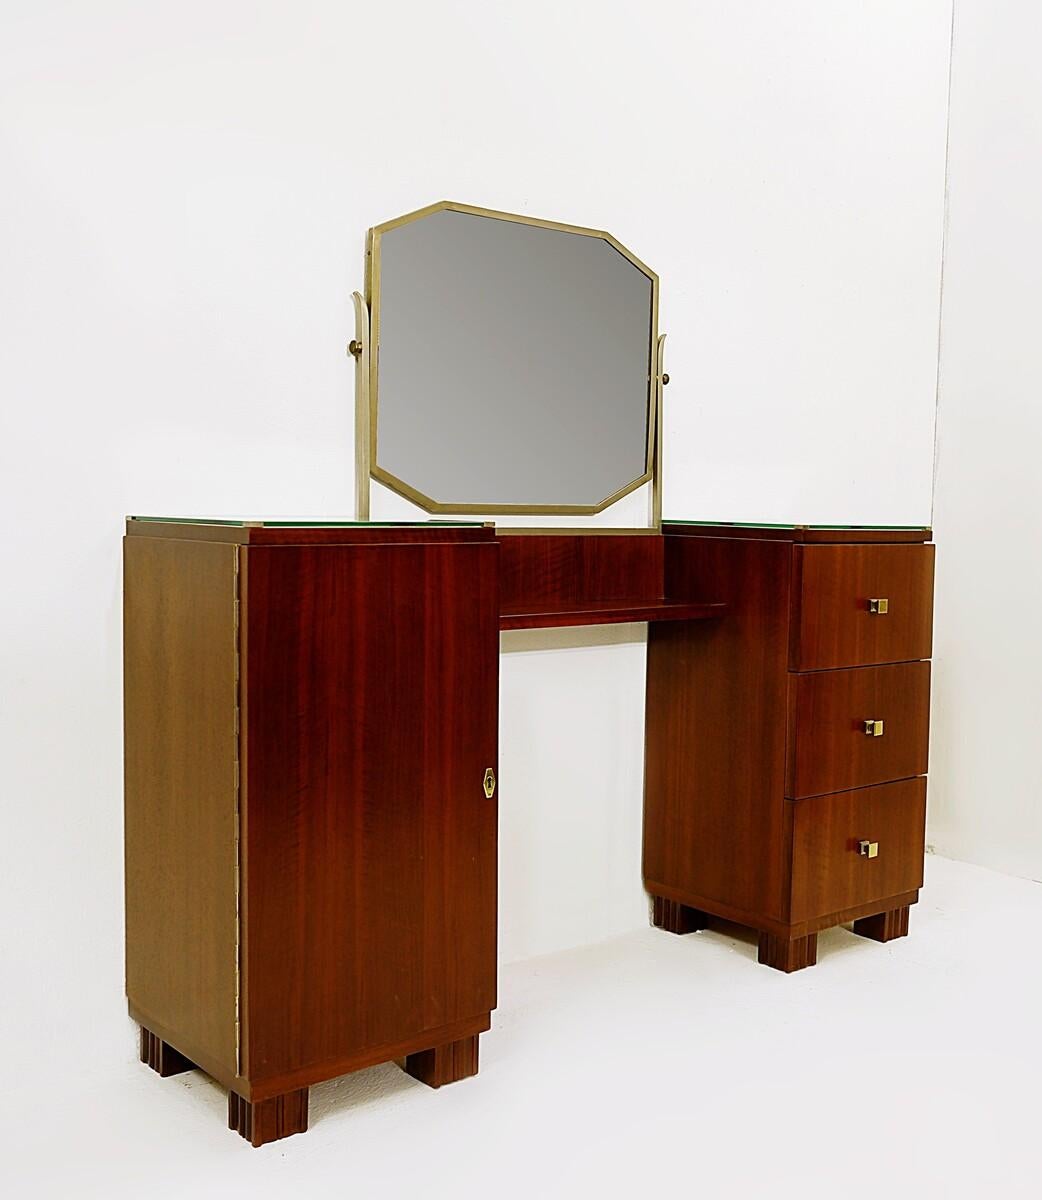 Wooden Art Deco dressing table.
 